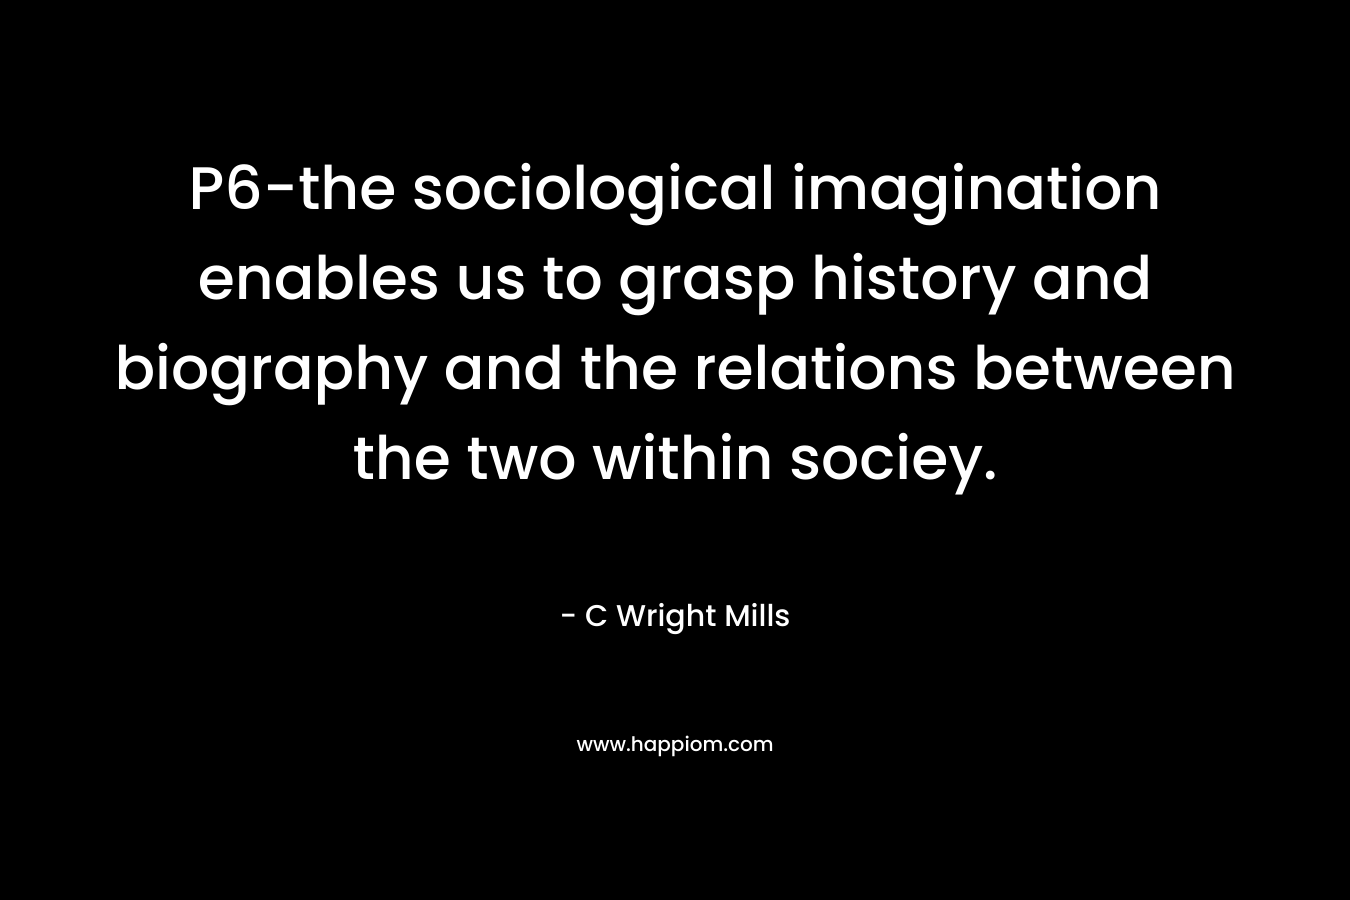 P6-the sociological imagination enables us to grasp history and biography and the relations between the two within sociey.